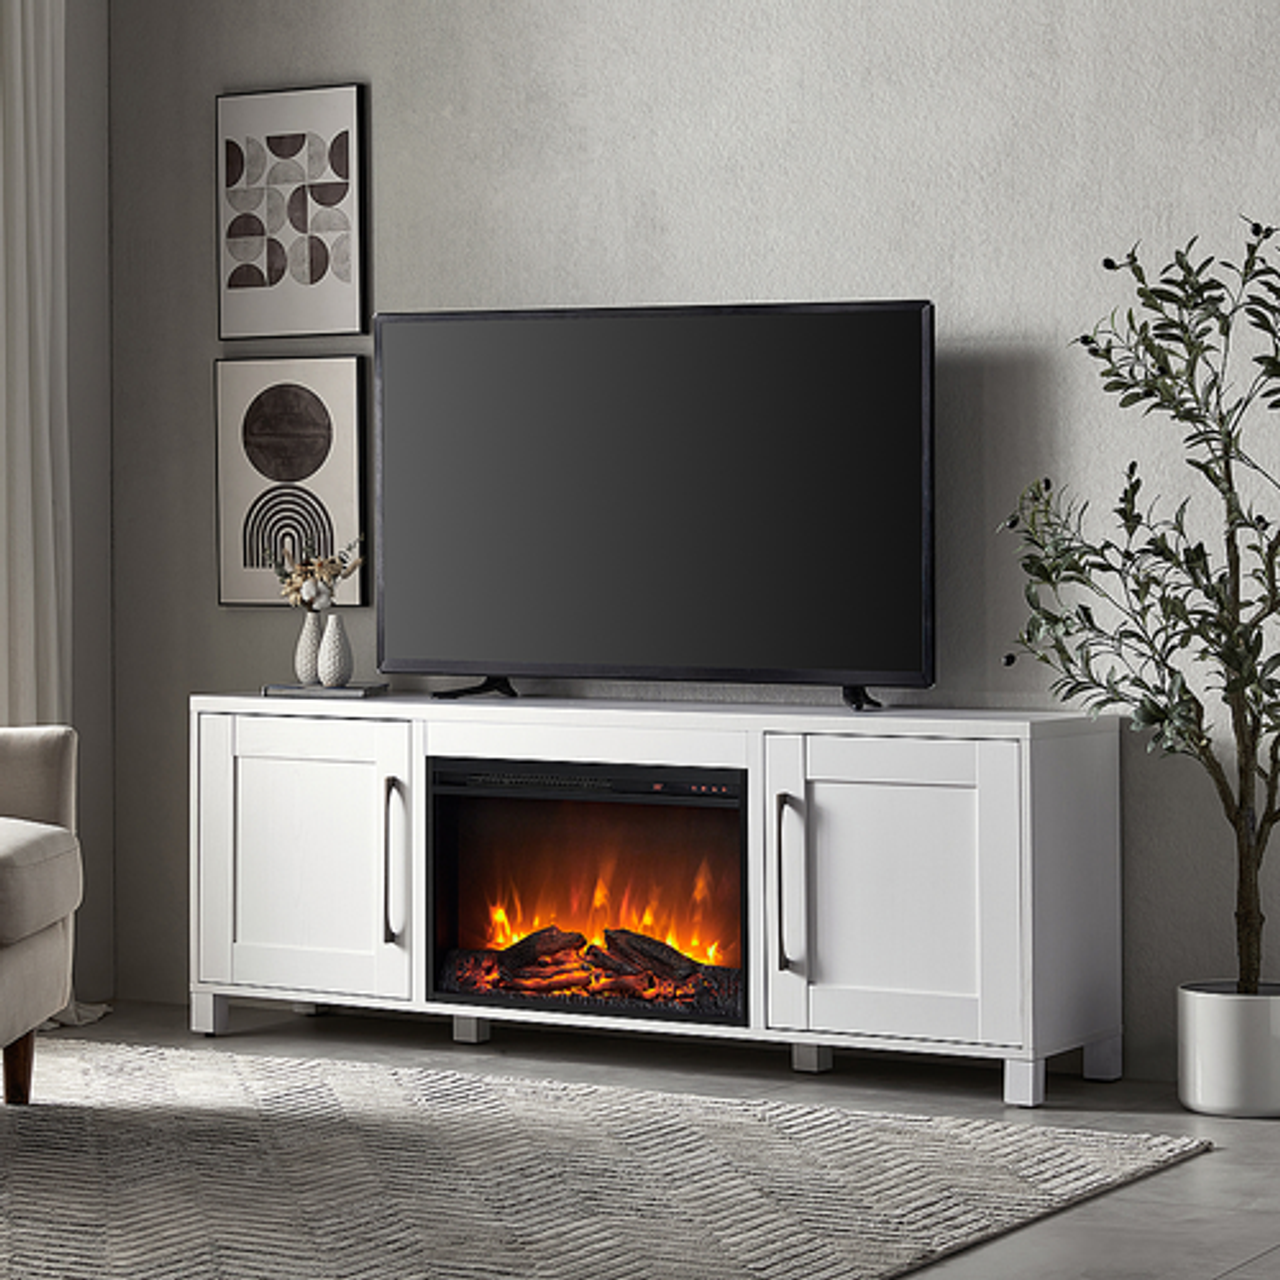 Camden&Wells - Chabot Log Fireplace TV Stand for TVs up to 80" - White